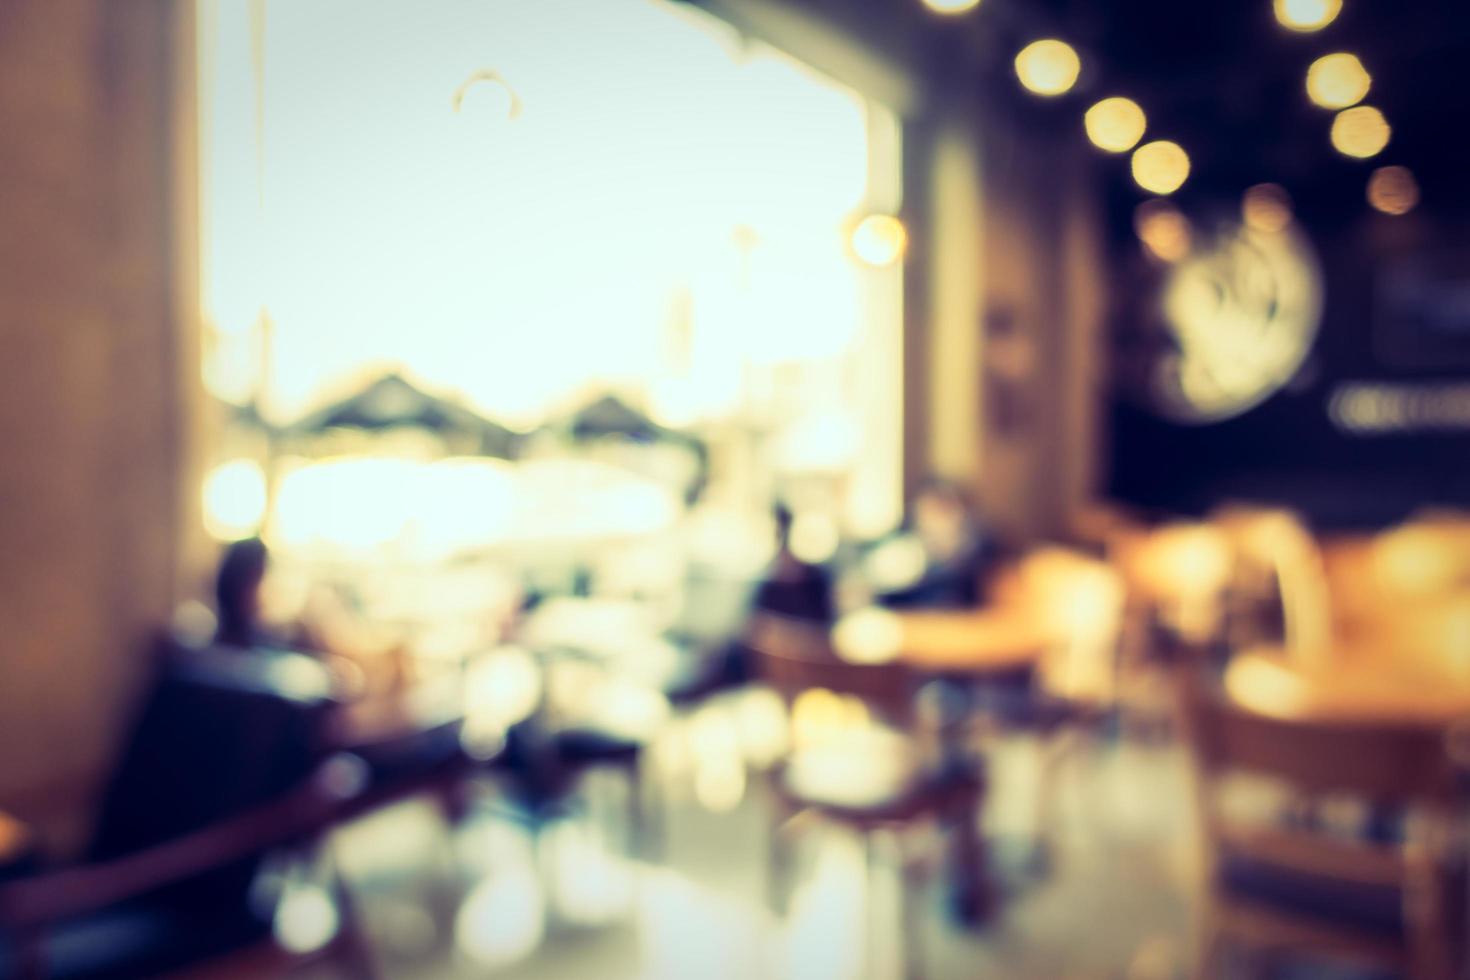 Abstract defocused coffee shop interior for background photo